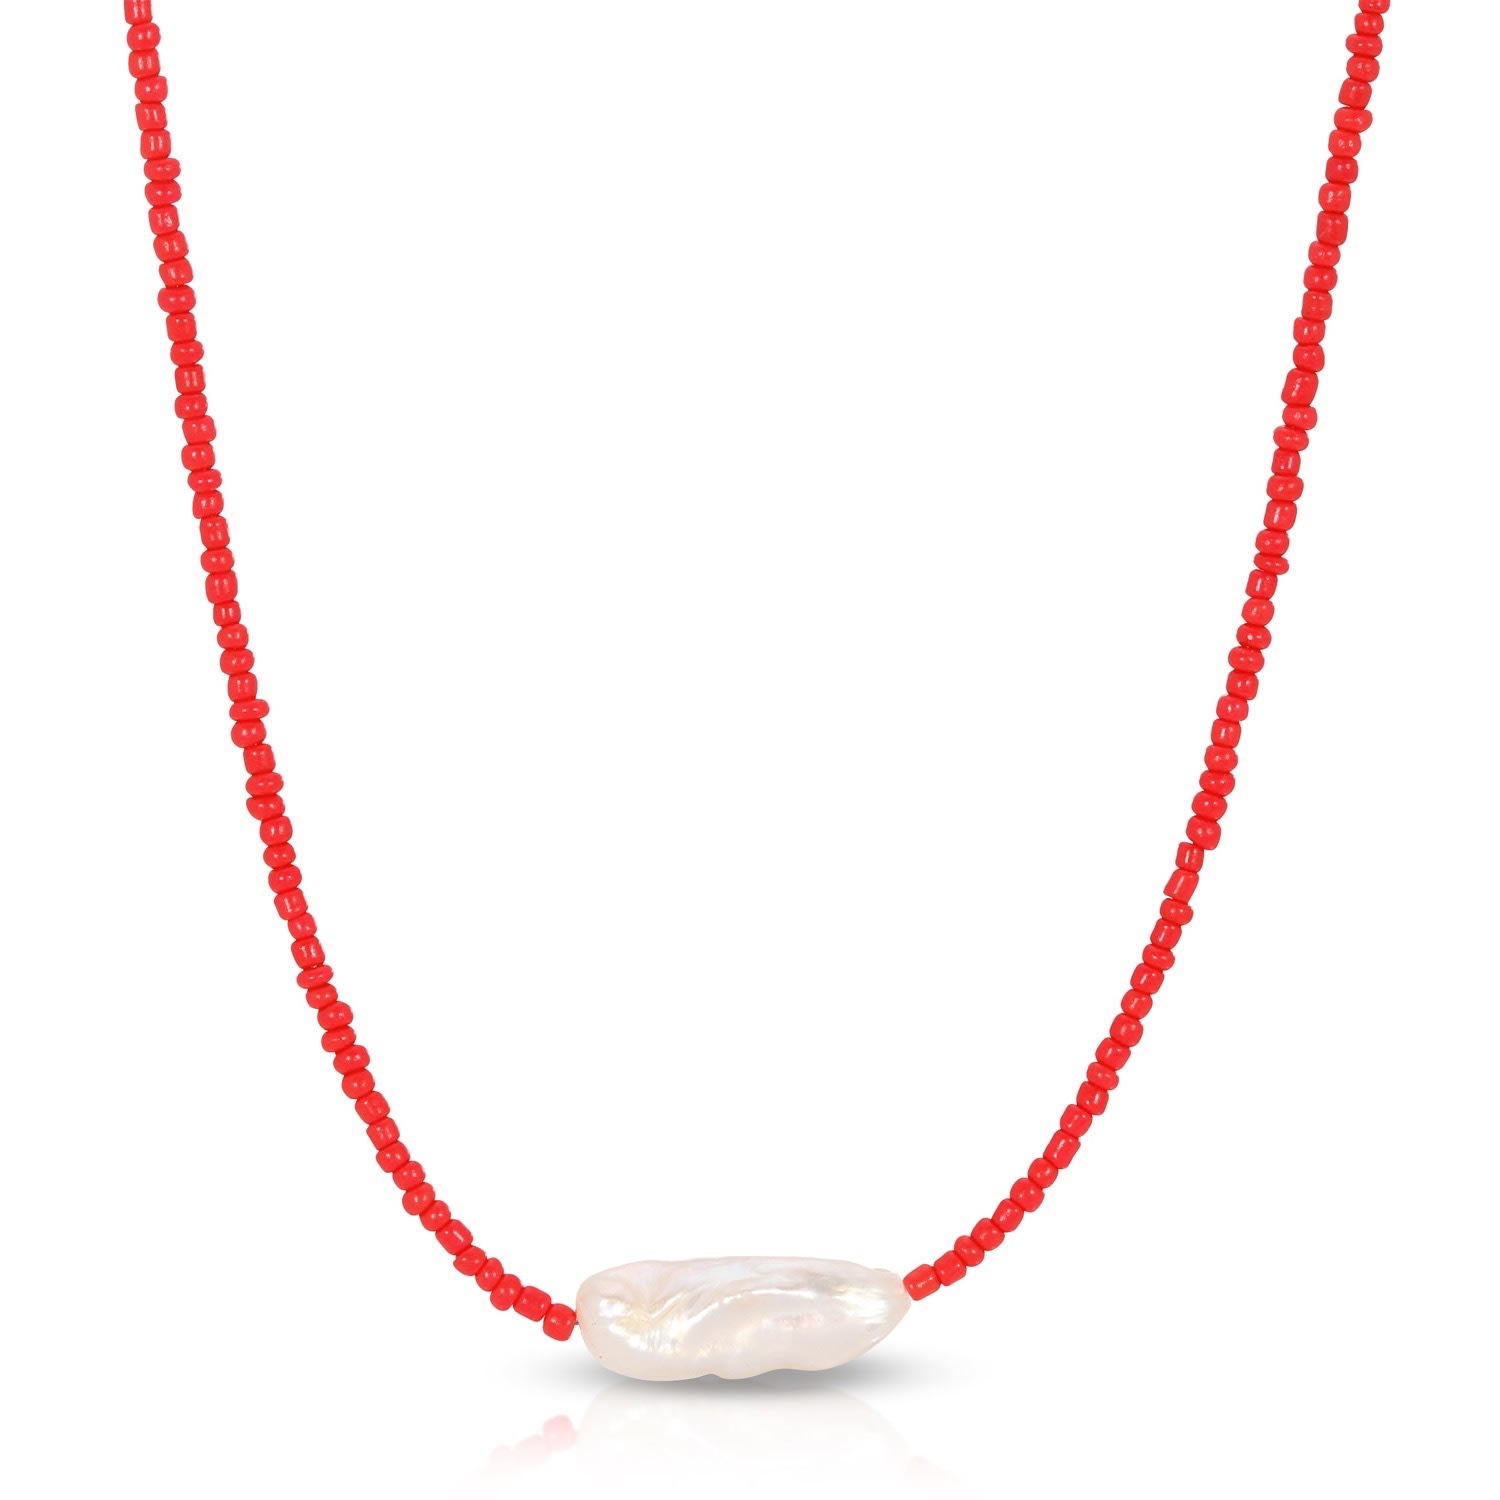 Essentials Jewels Women's Colored Baroque Pearl Necklace - Red